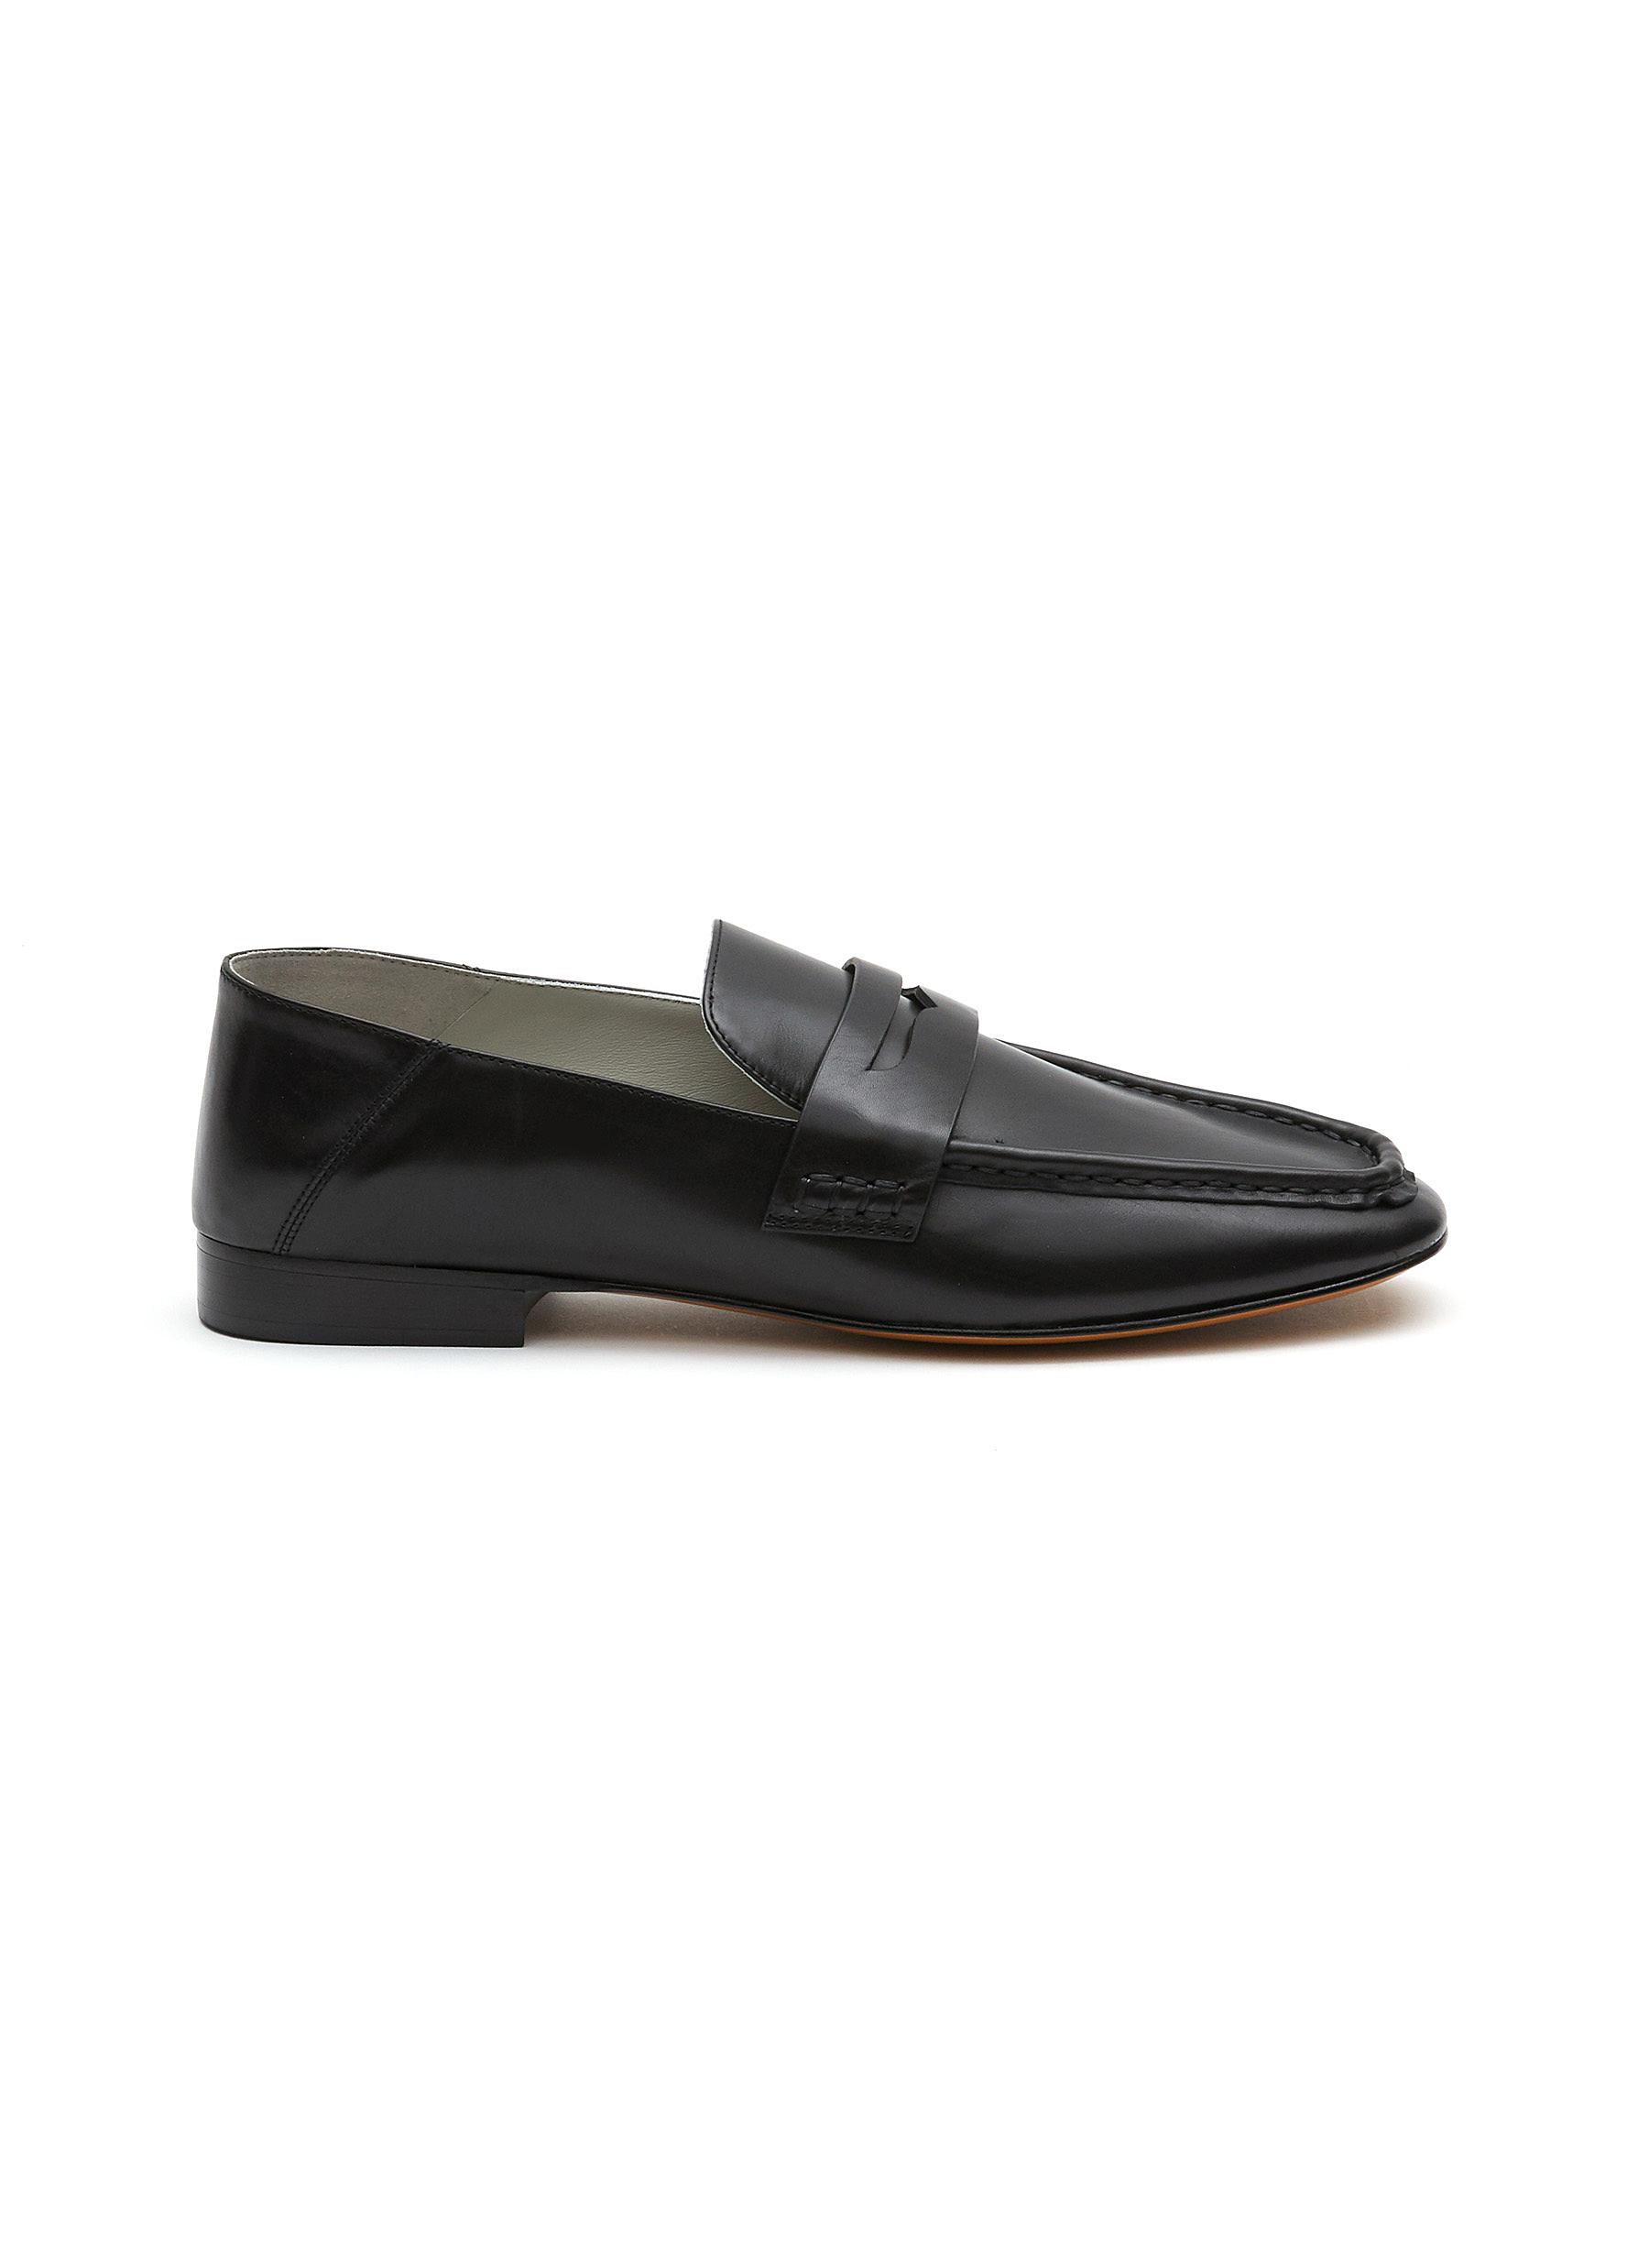 EQUIL ‘LONDON' FLAT SQUARE TOE LEATHER PENNY LOAFERS